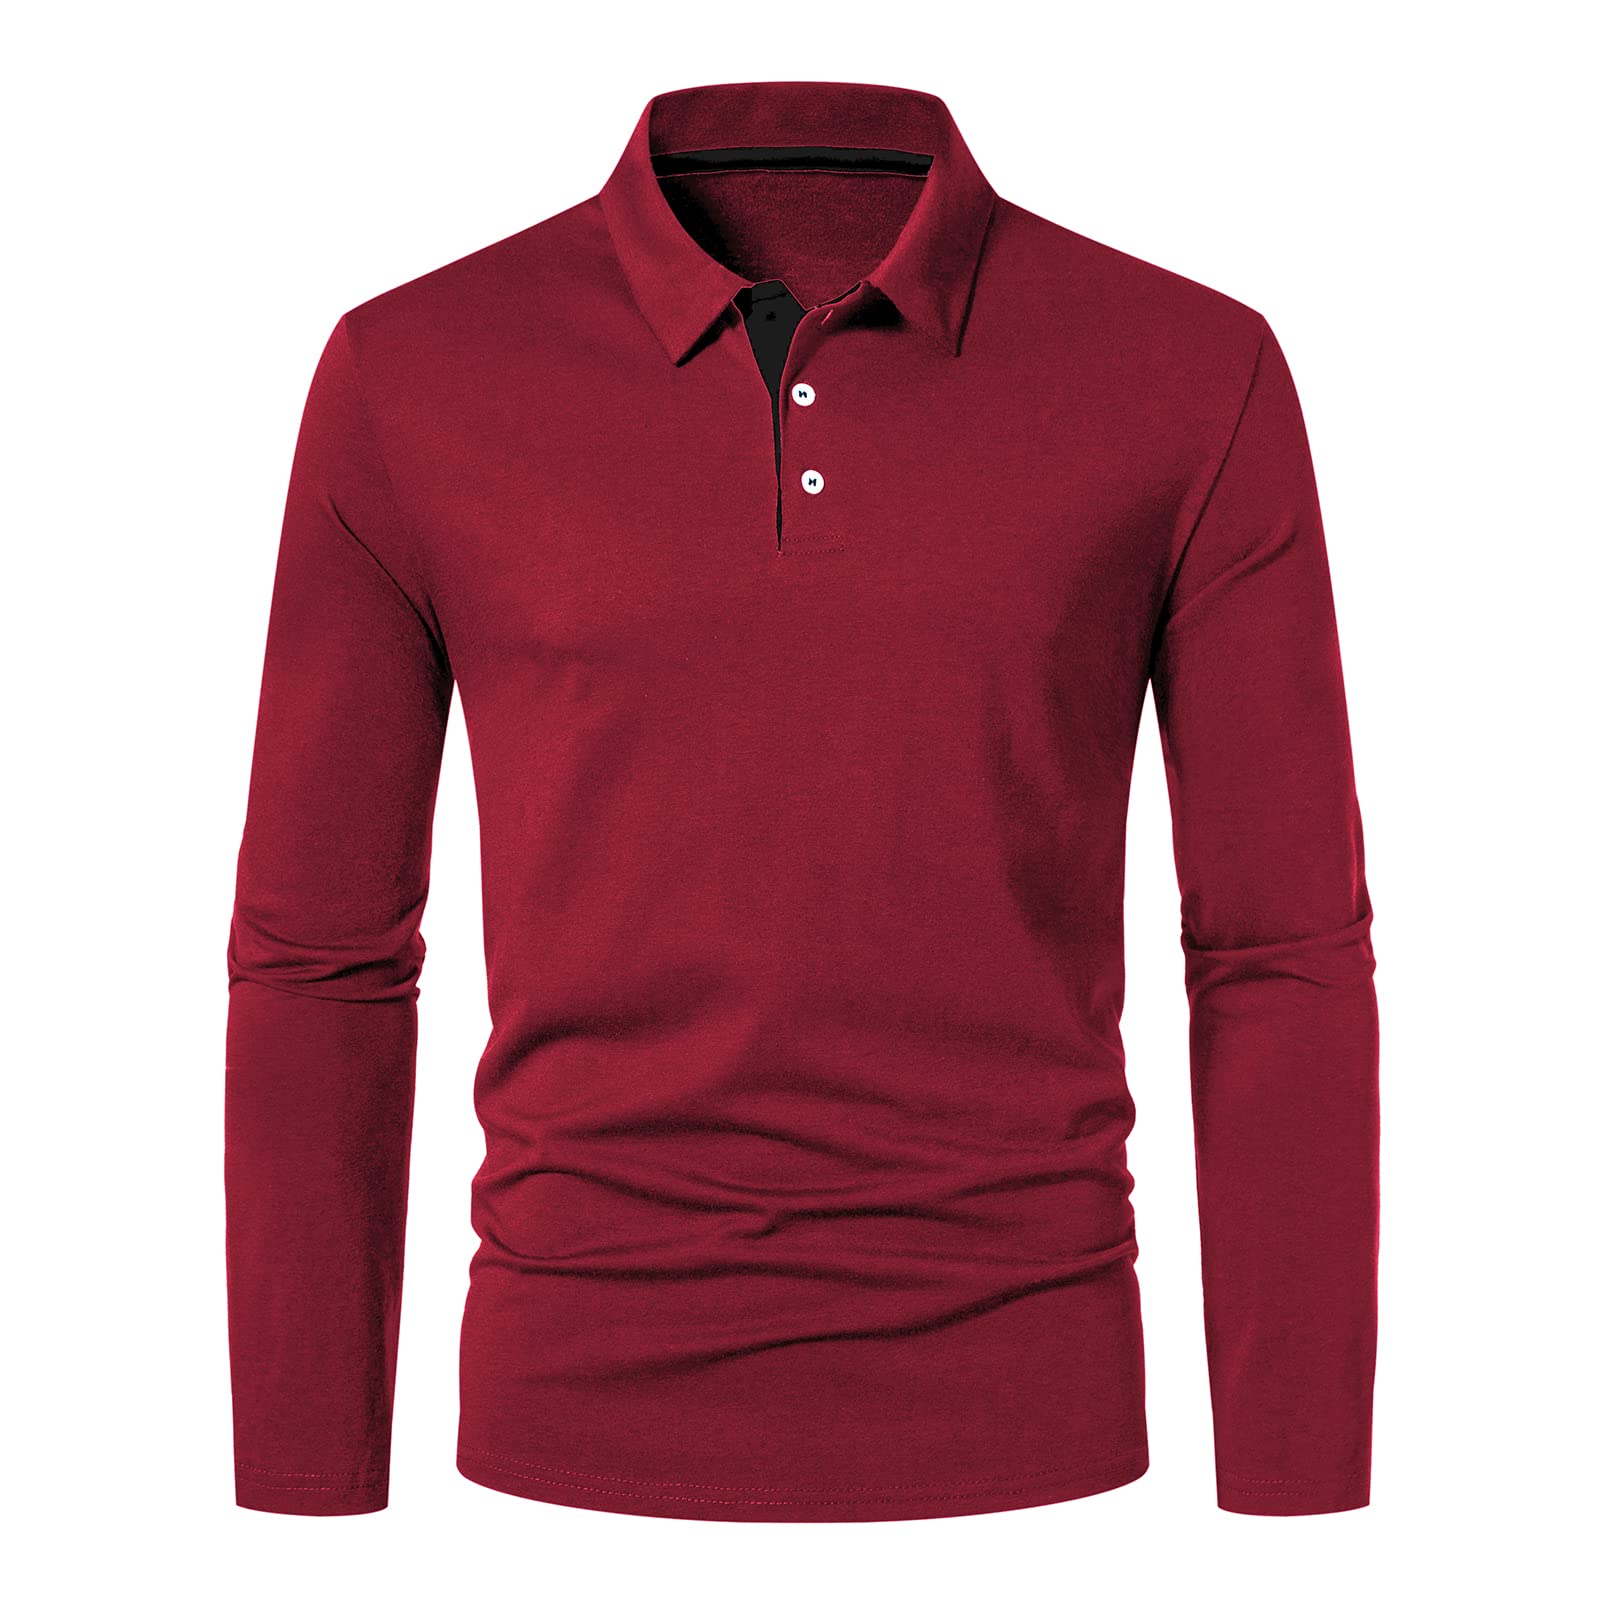 A Waterwang Mens Long Sleeve Polo Shirts, Slim-Fit Cotton Golf Polo Shirts Basic Designed Wine Red